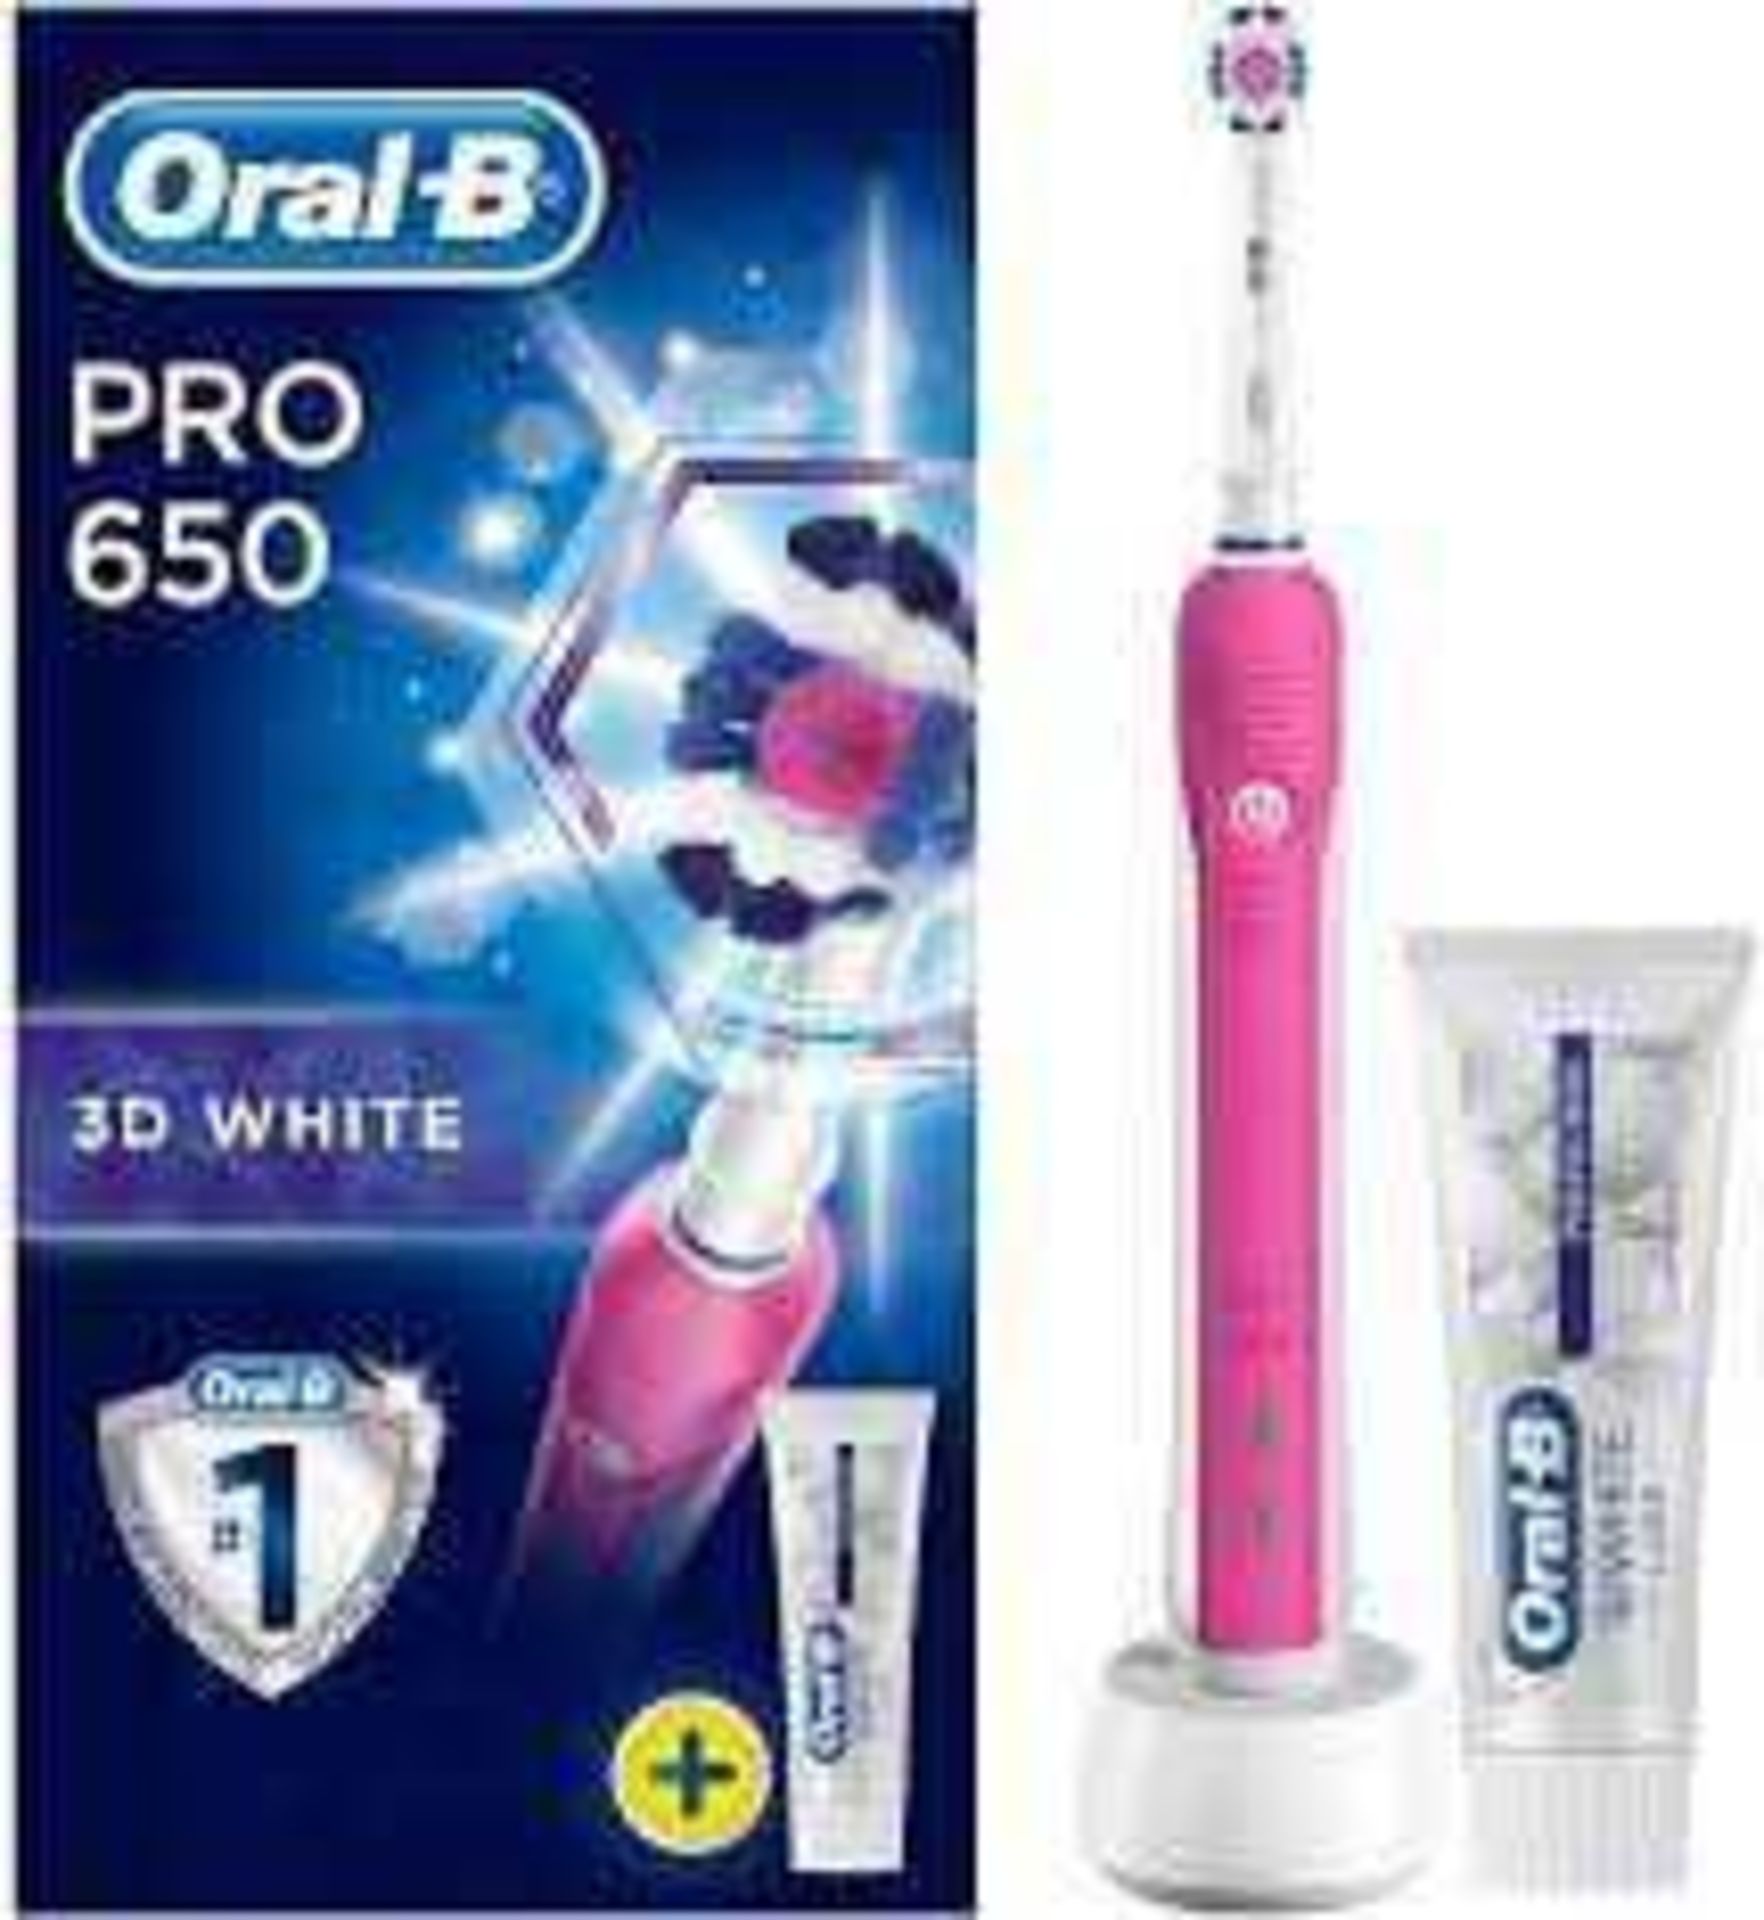 Combined RRP £140 Lot To Contain Two Boxed Oral B Pro 650 Electric Toothbrushes - Image 2 of 2